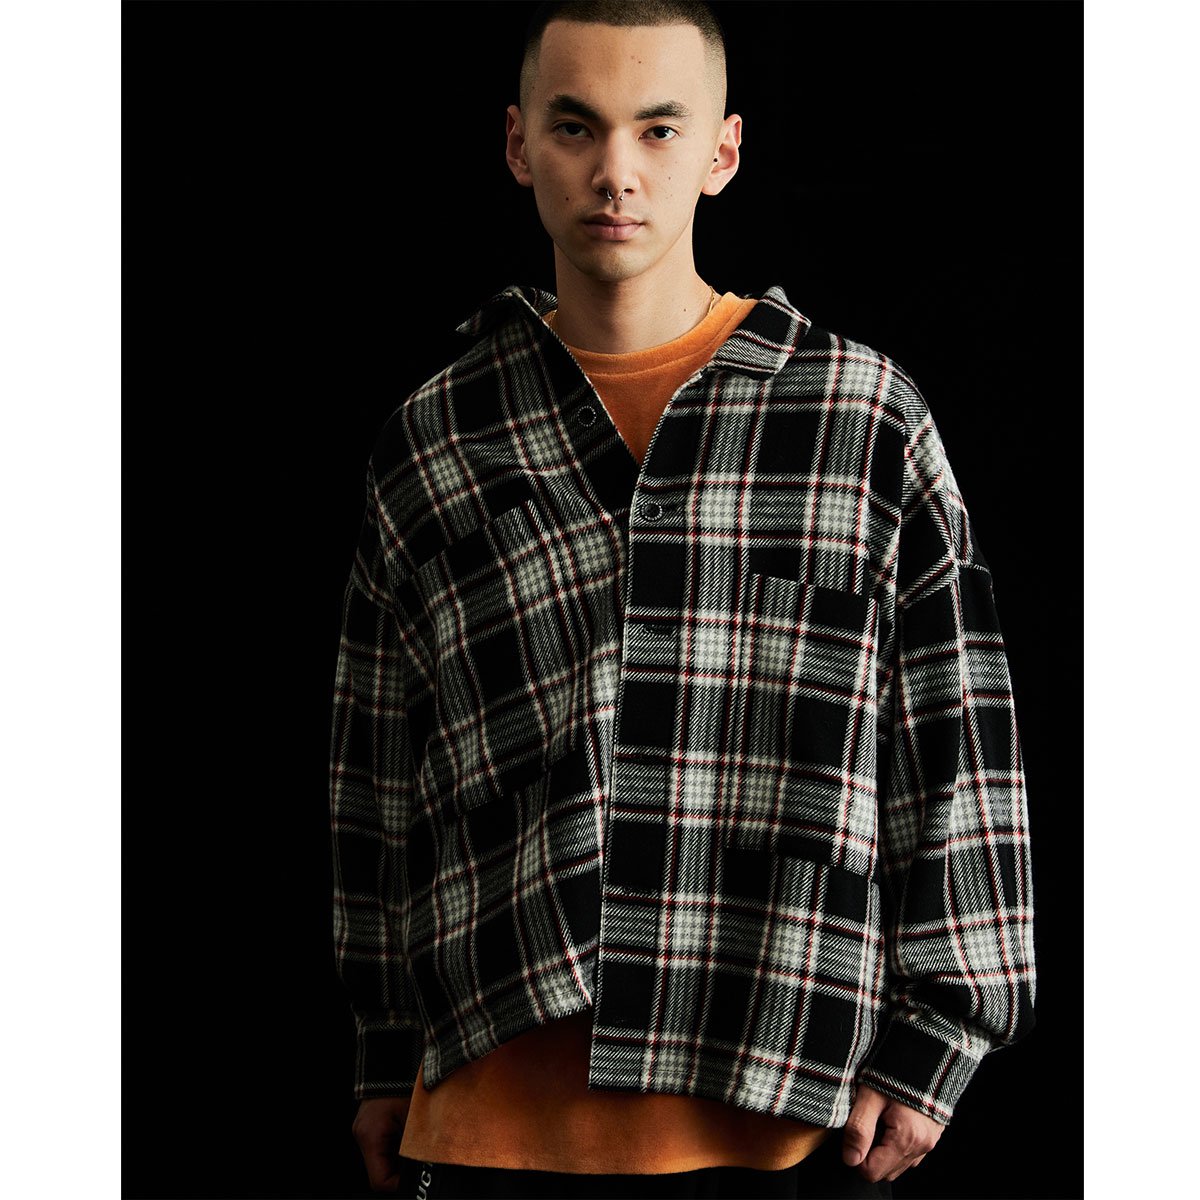 PLAID FLANNEL JKT - TIGHTBOOTH PRODUCTION